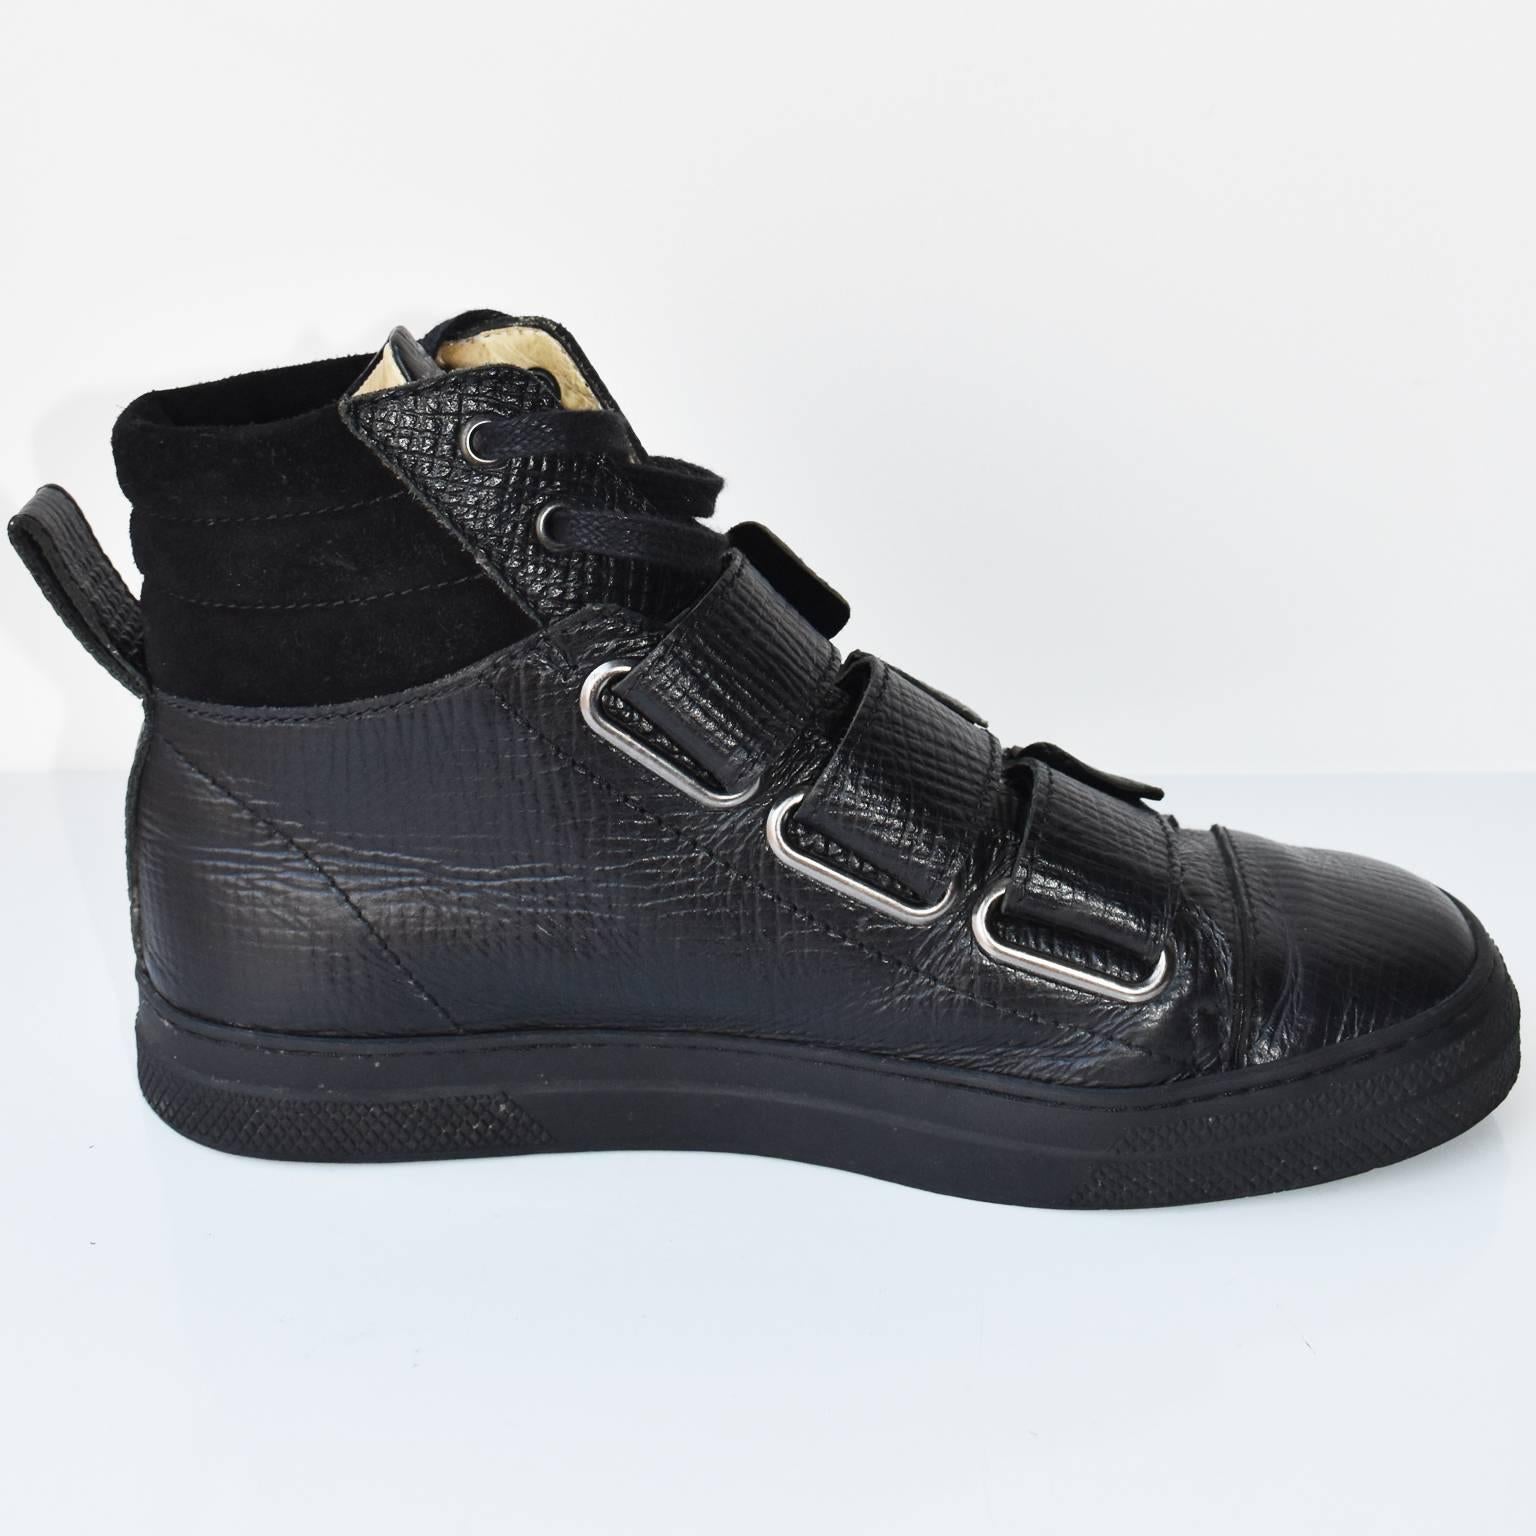 Jean Paul Gaultier Black Leather High Top Trainers In Excellent Condition For Sale In London, GB